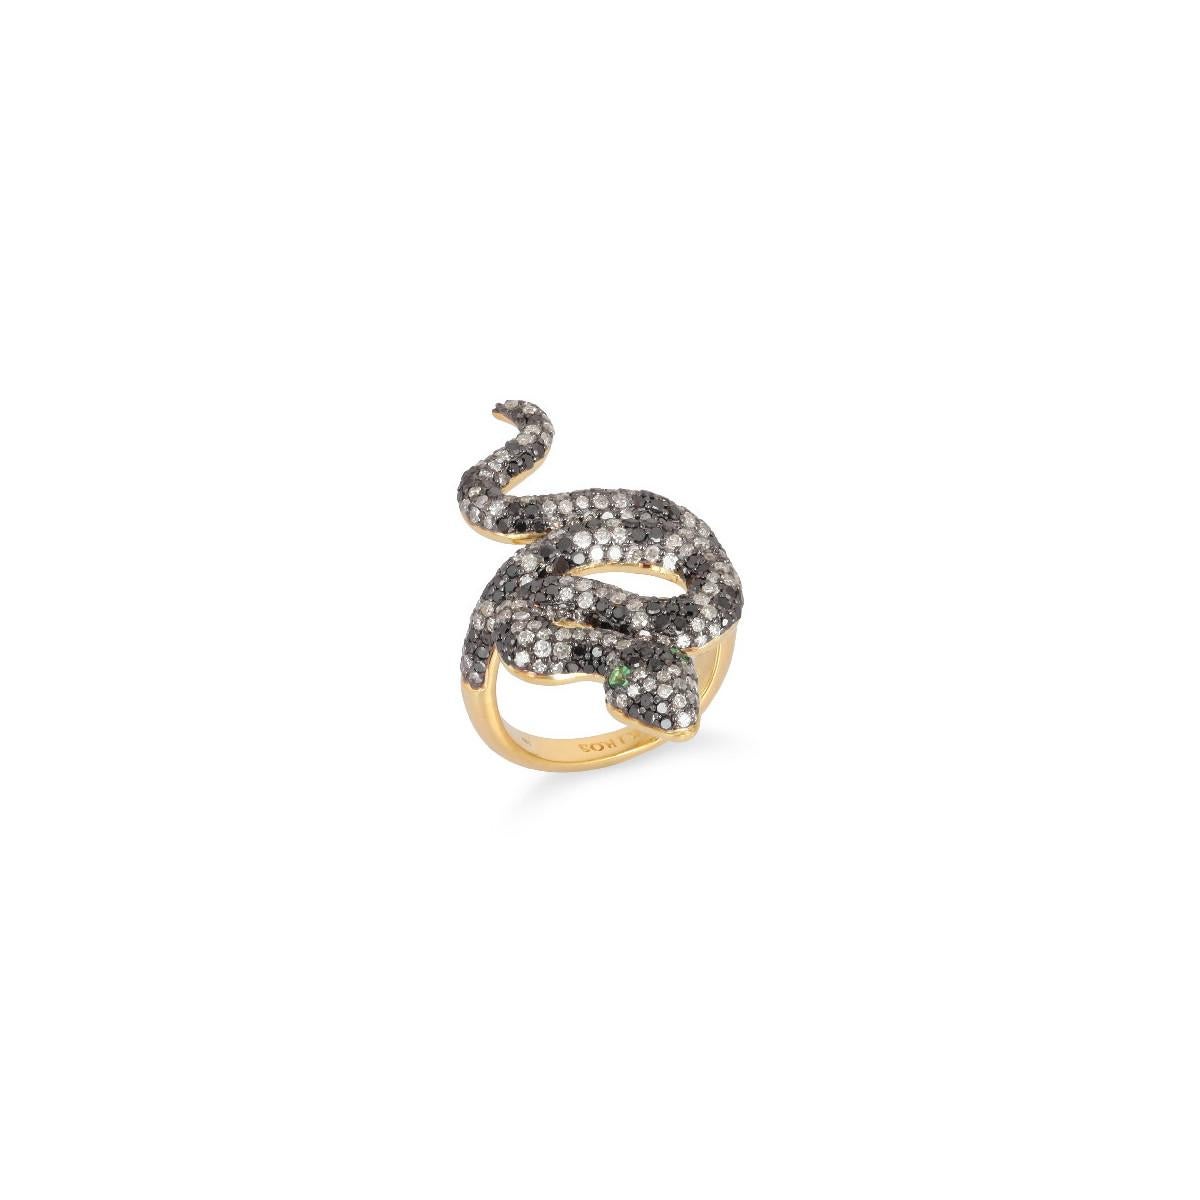 Snake Ring in 18 K Gold, Silver,  Diamonds and Tsavorites
Ring in 18K gold weighing 2.28 g, silver 5.62 g, 345 diamonds 2.44 ct and 2 tsavorites 0.04 ct

   Size 14
◘ Weight 8,02 gr.
◘ Gold Weight 2,28 gr.  
◘  Silver Weight 5,62 gr  
◘ Diamonds